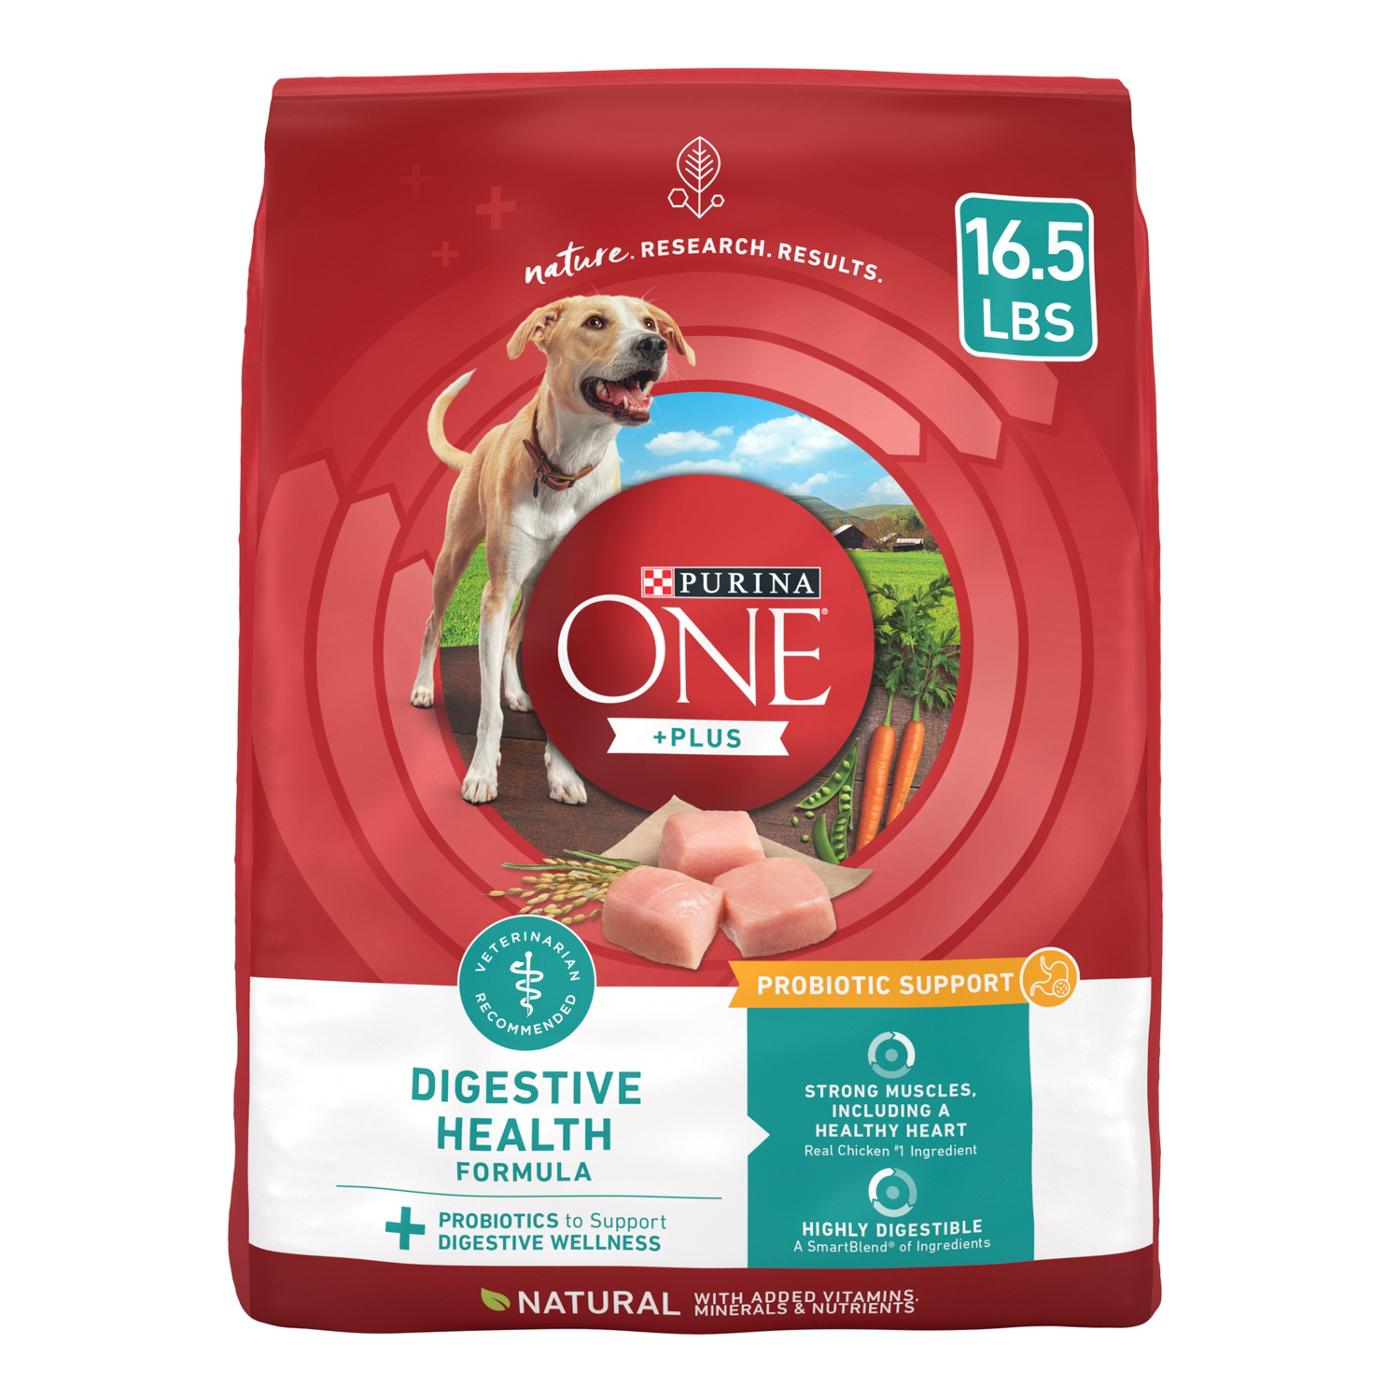 Purina ONE Purina One Plus Digestive Health Formula Dry Dog Food Natural with Added Vitamins, Minerals and Nutrients; image 1 of 7